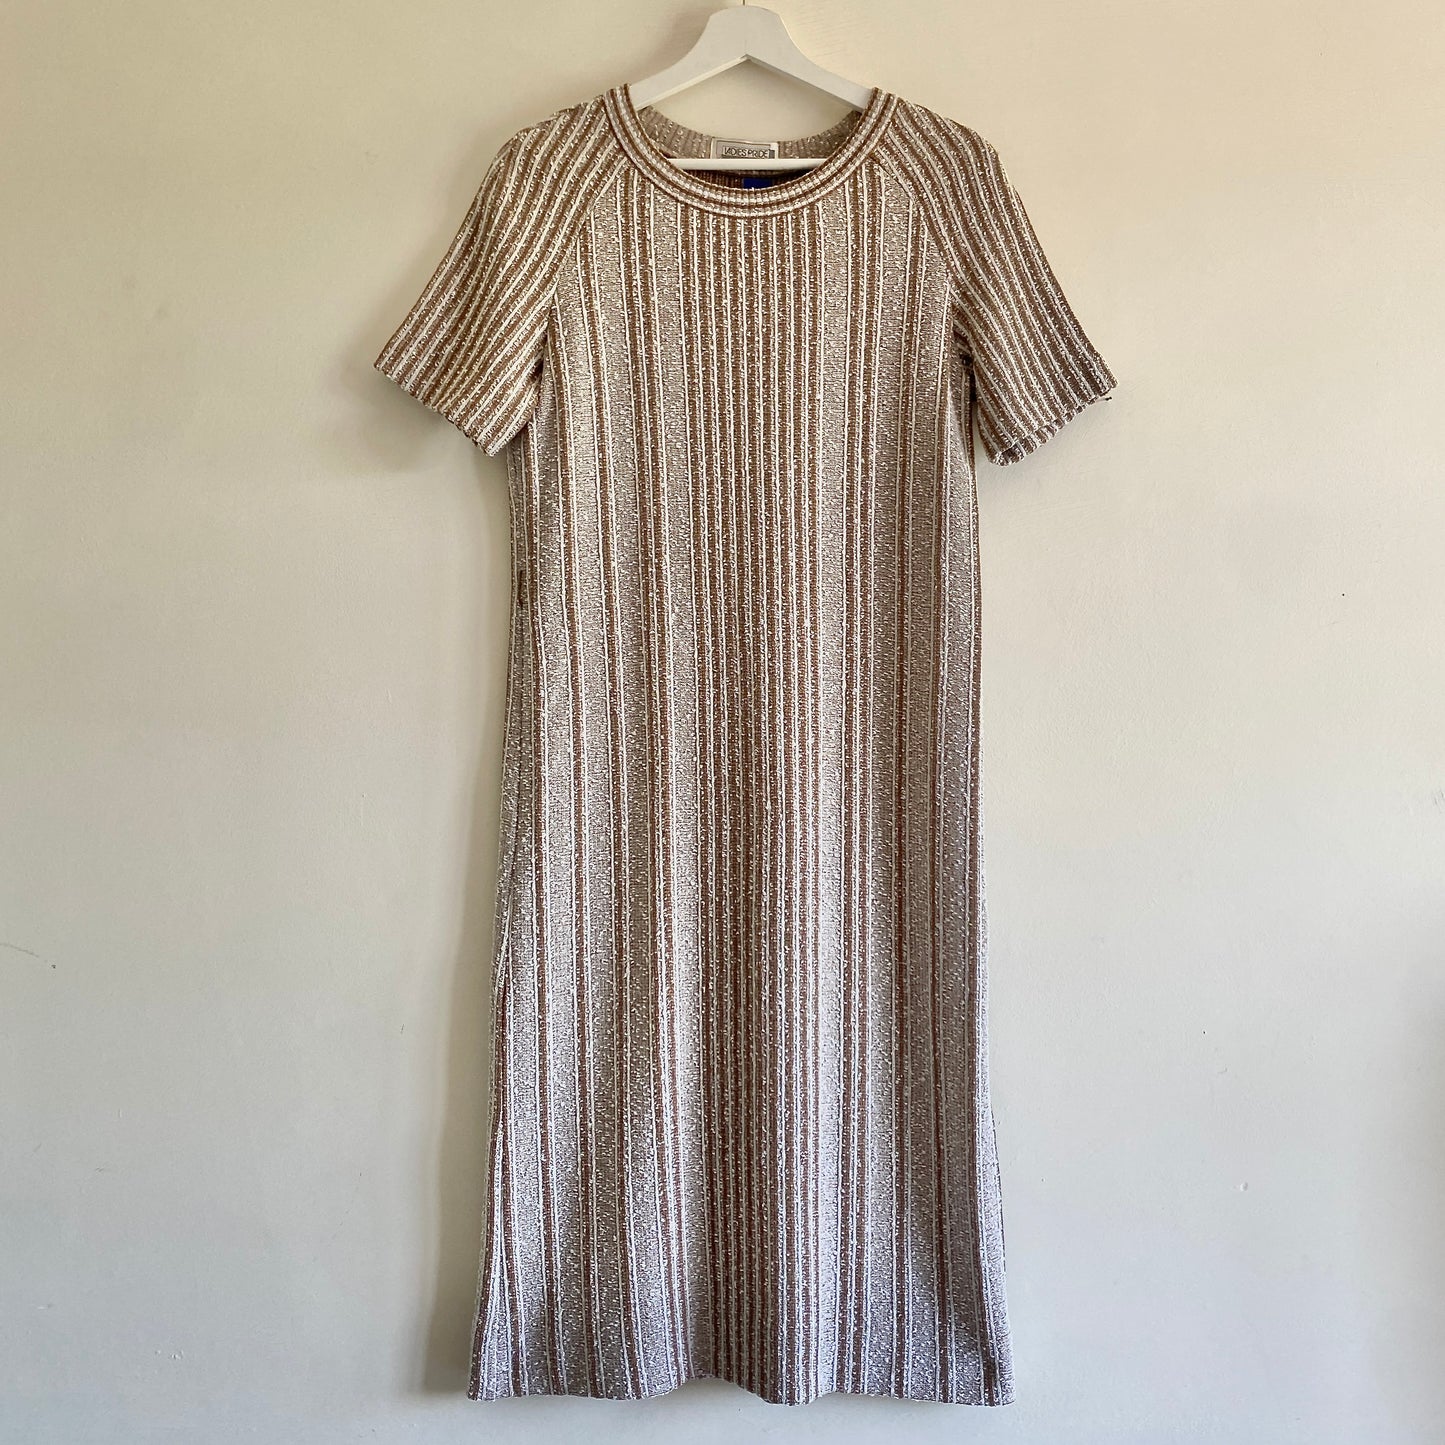 Early 80s stretch knit vintage dress By Ladies Pride Round collar Short sleeves 50% polyester 36% acrylic 14% polyamide Machine washable Vintage size 12